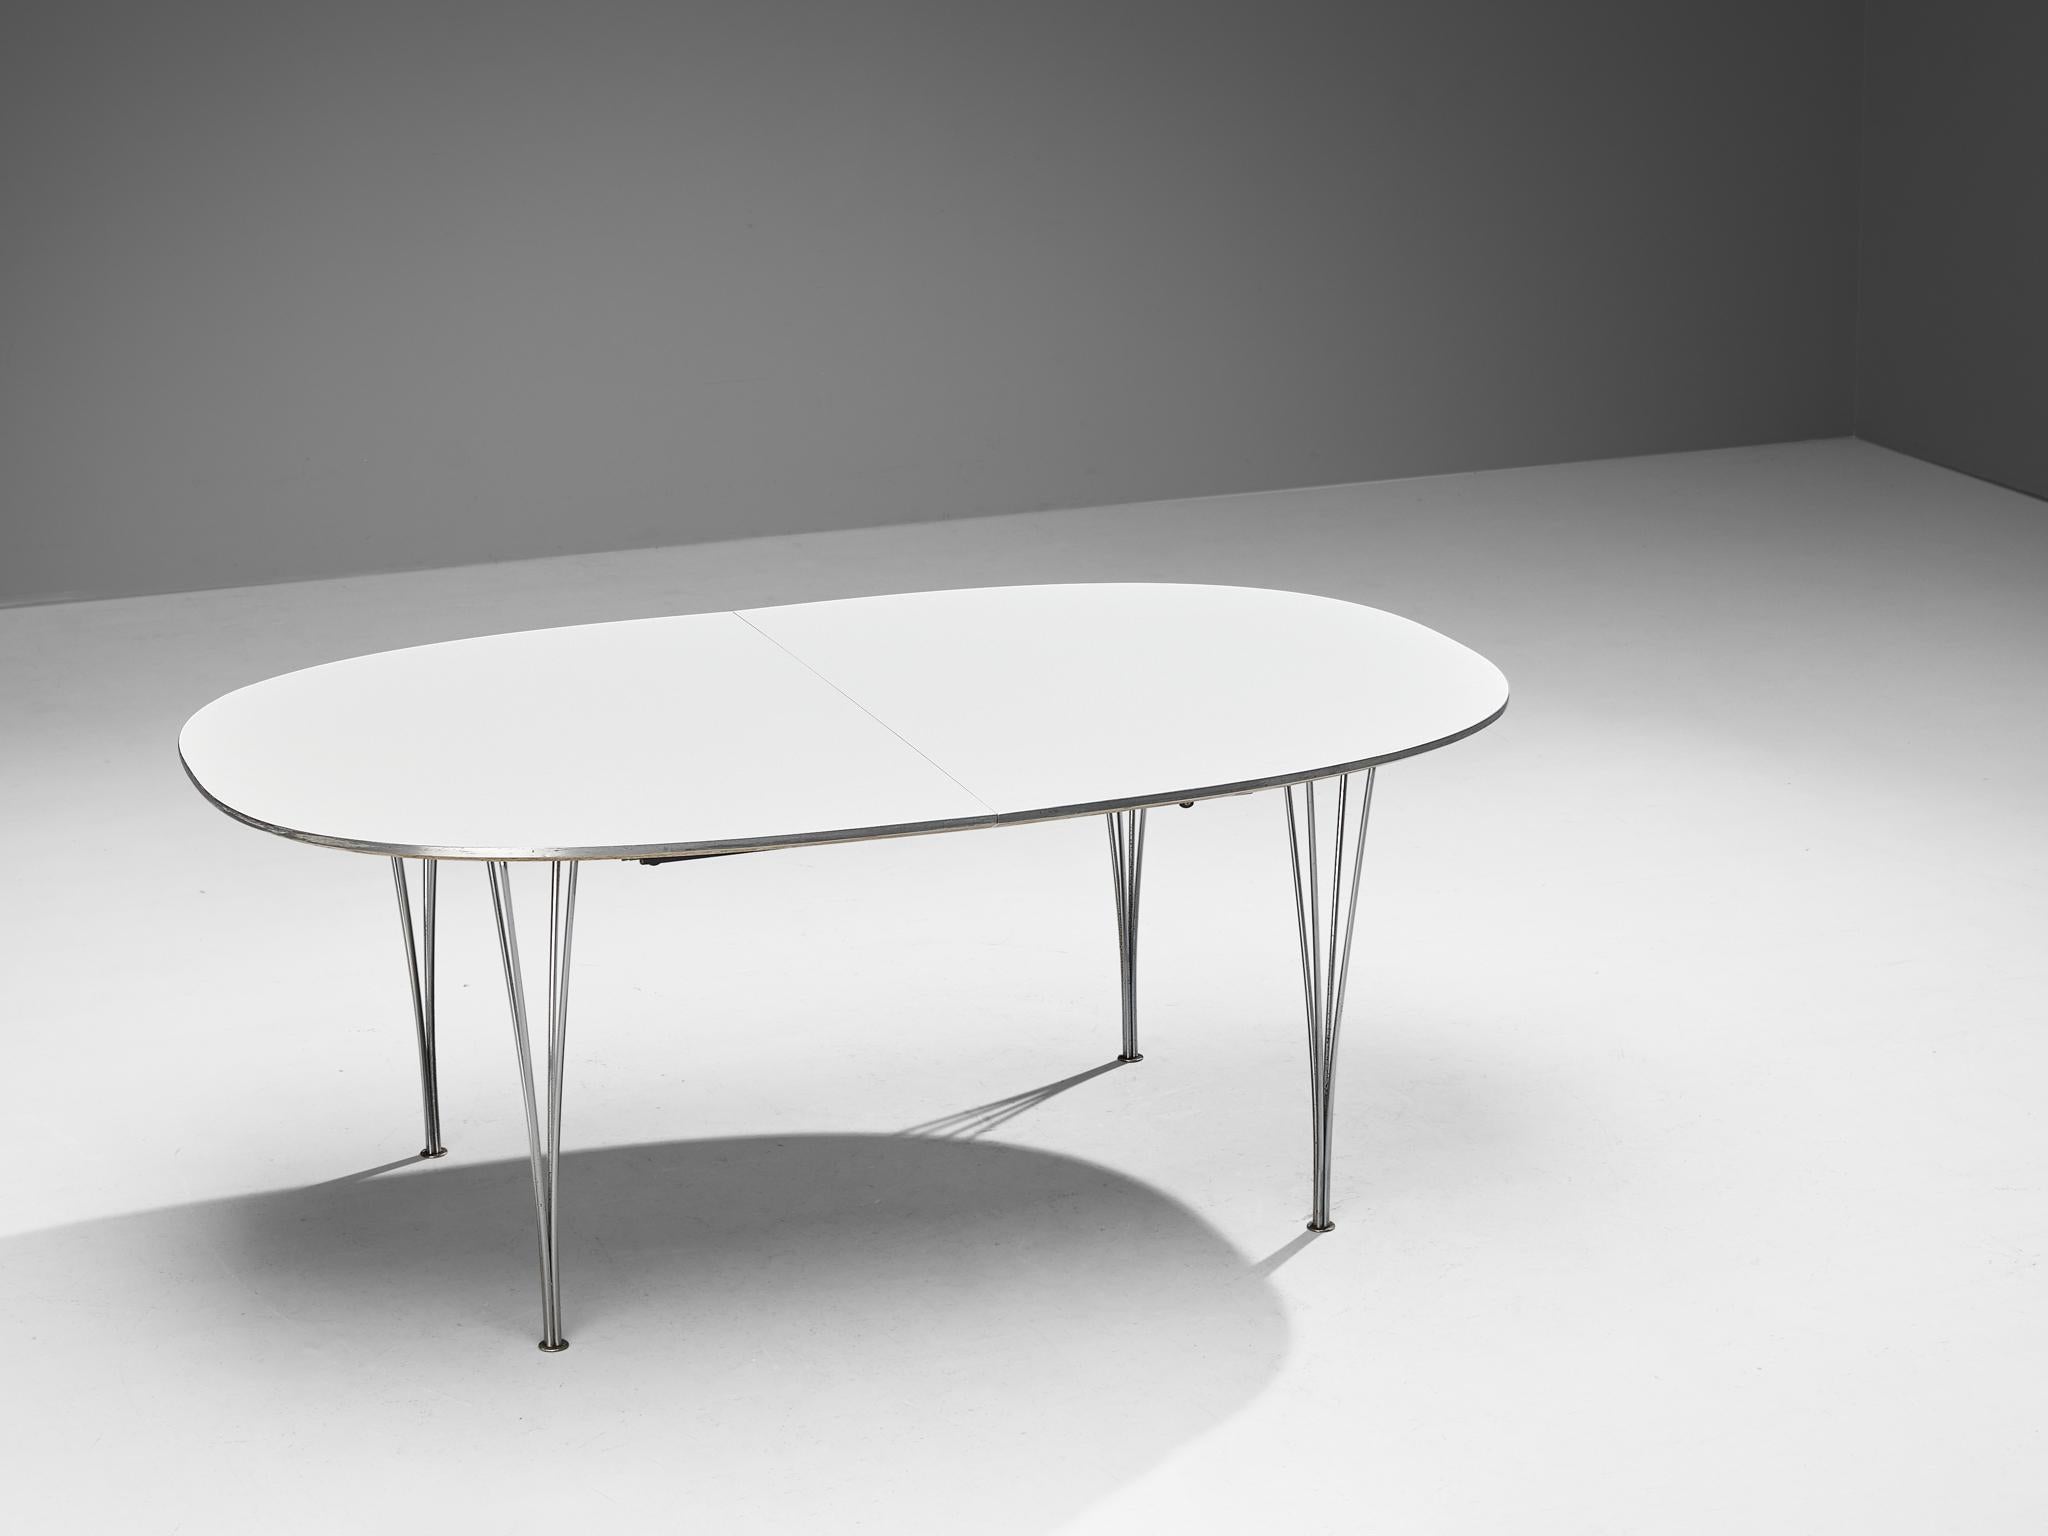 Extendable dining table, beech, steel, by Piet Hein, Arne Jacobsen & Bruno Mathsson for Fritz Hansen, Denmark, design 1968. 

Dining table in lacquered beech and steel. This version is produced by Fritz Hansen in the 1980s. This table was designed